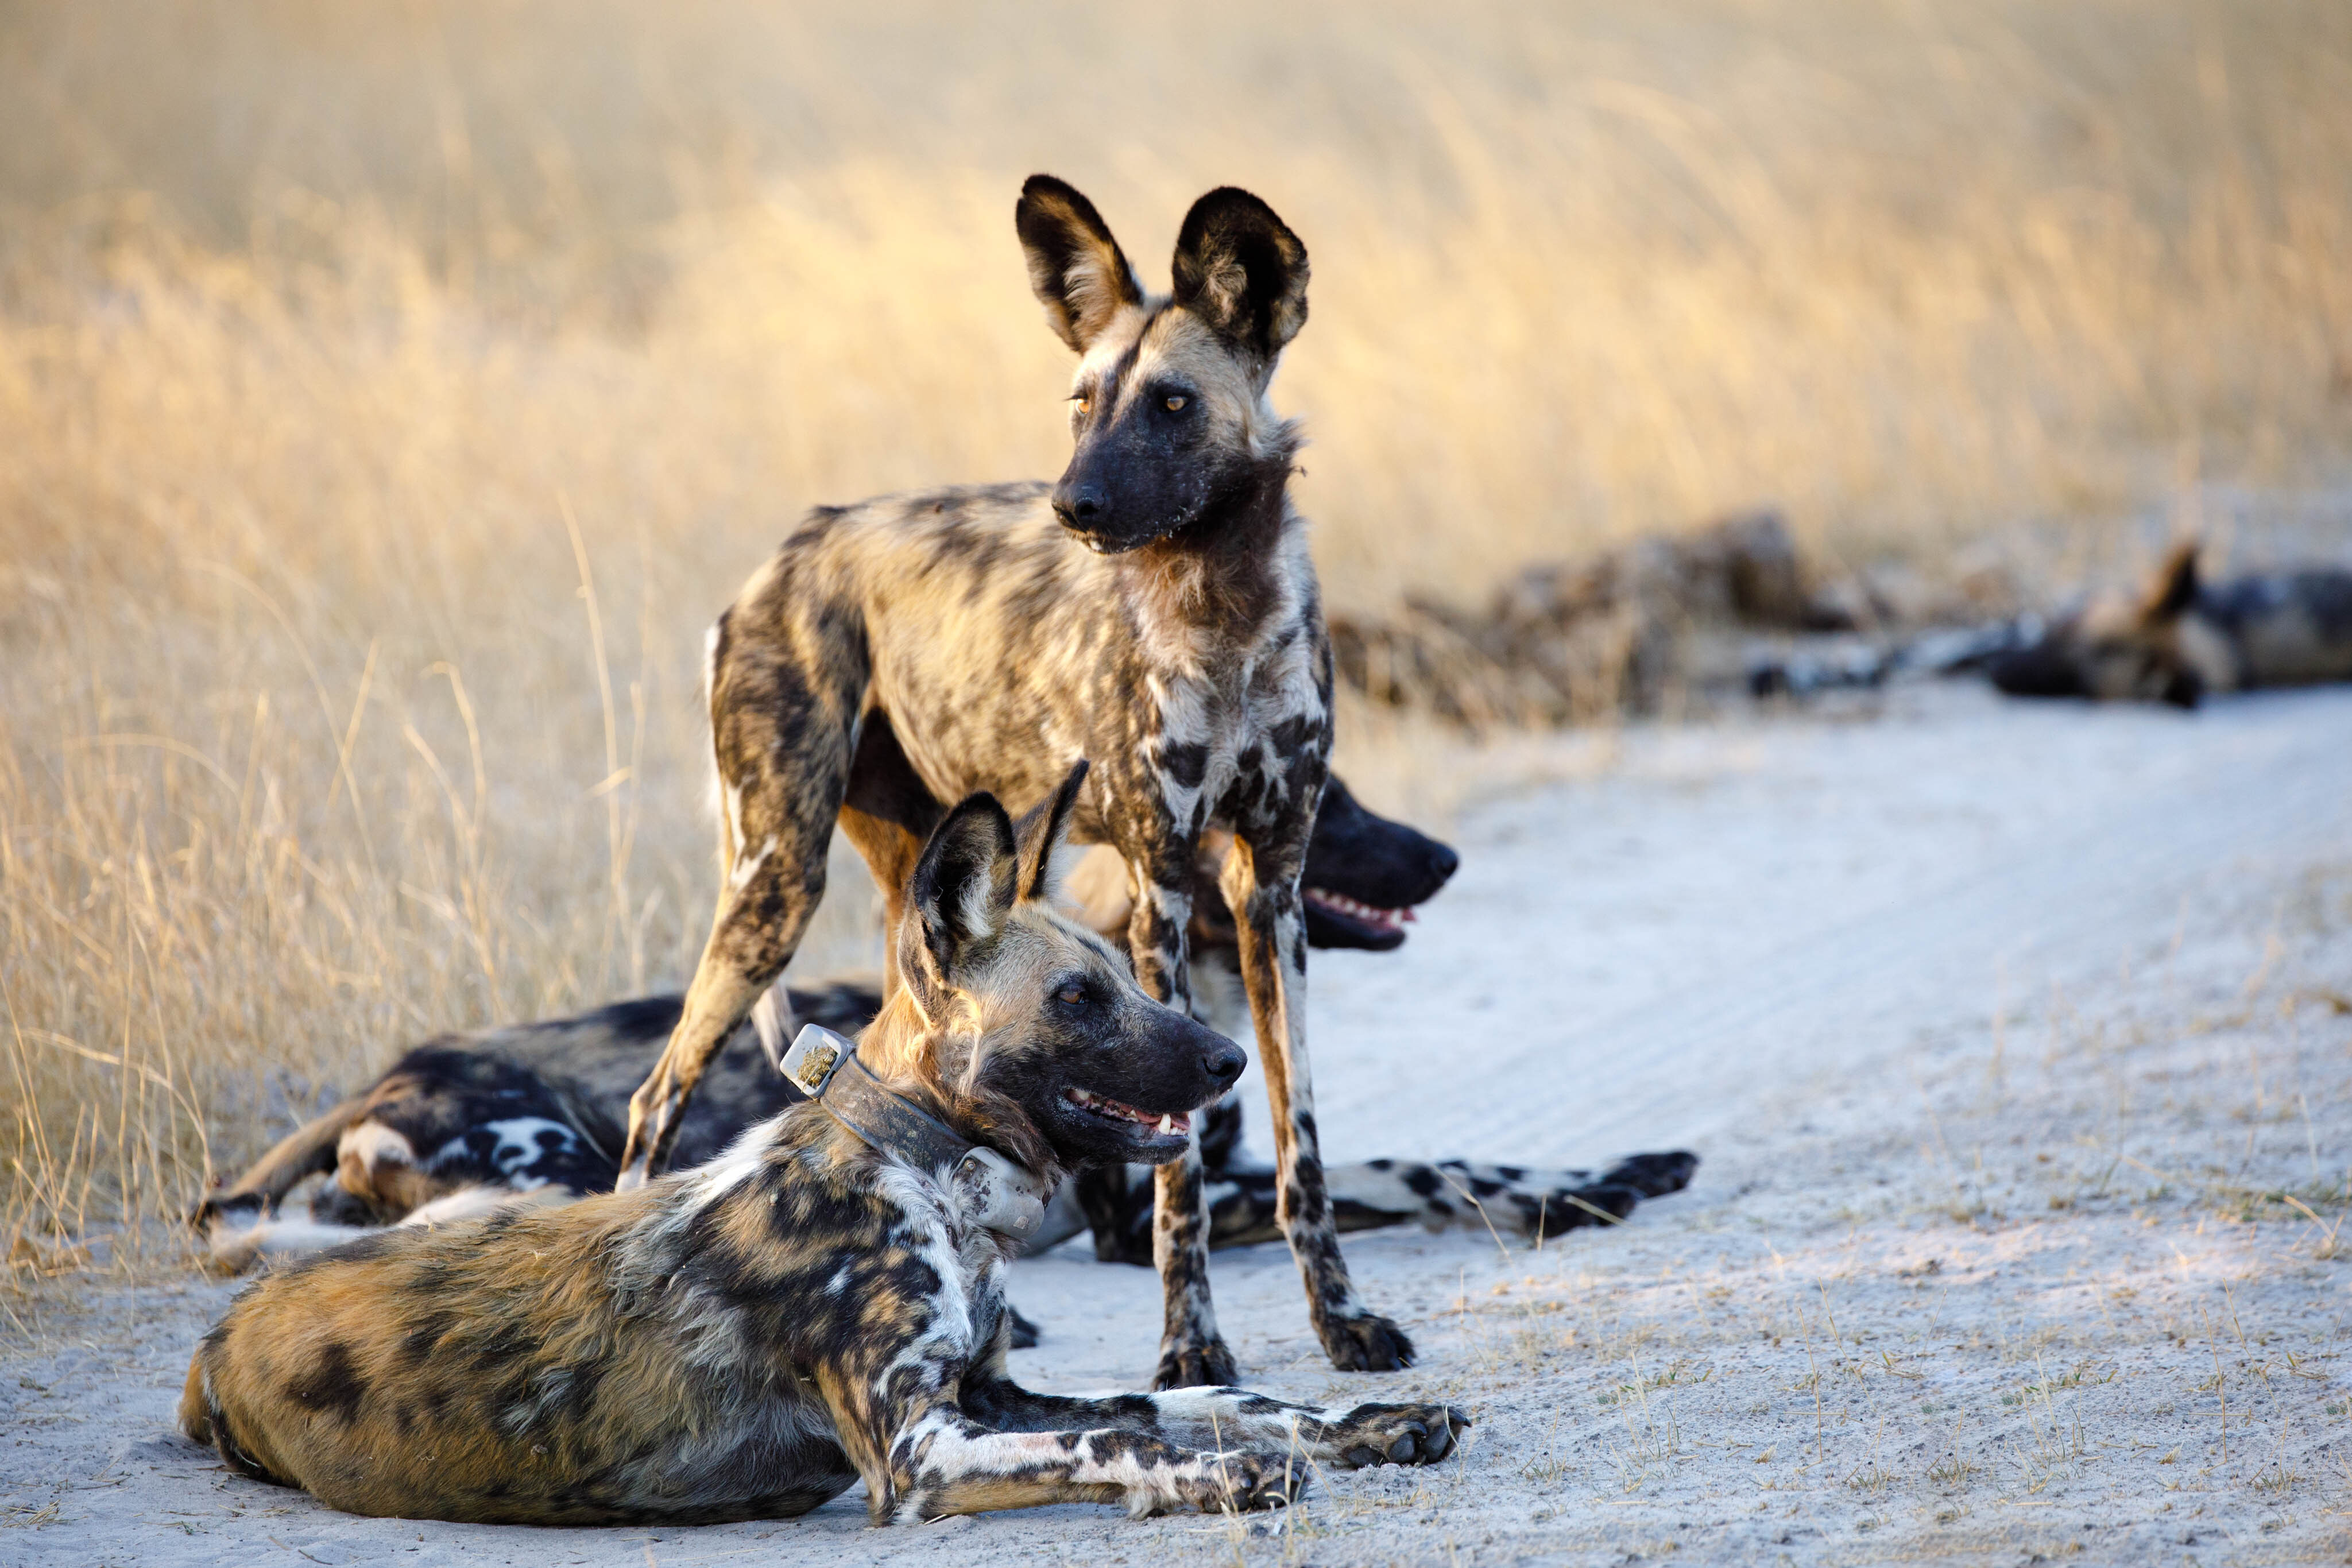 An African wild dog crosses a small canal in northern Botswana's Okavango Delta. Although the dog depicted here is able to cross the river with ease, the same does not hold true for larger swamps, rivers and lakes that prove to be nearly insurmountable obstacles for the species.